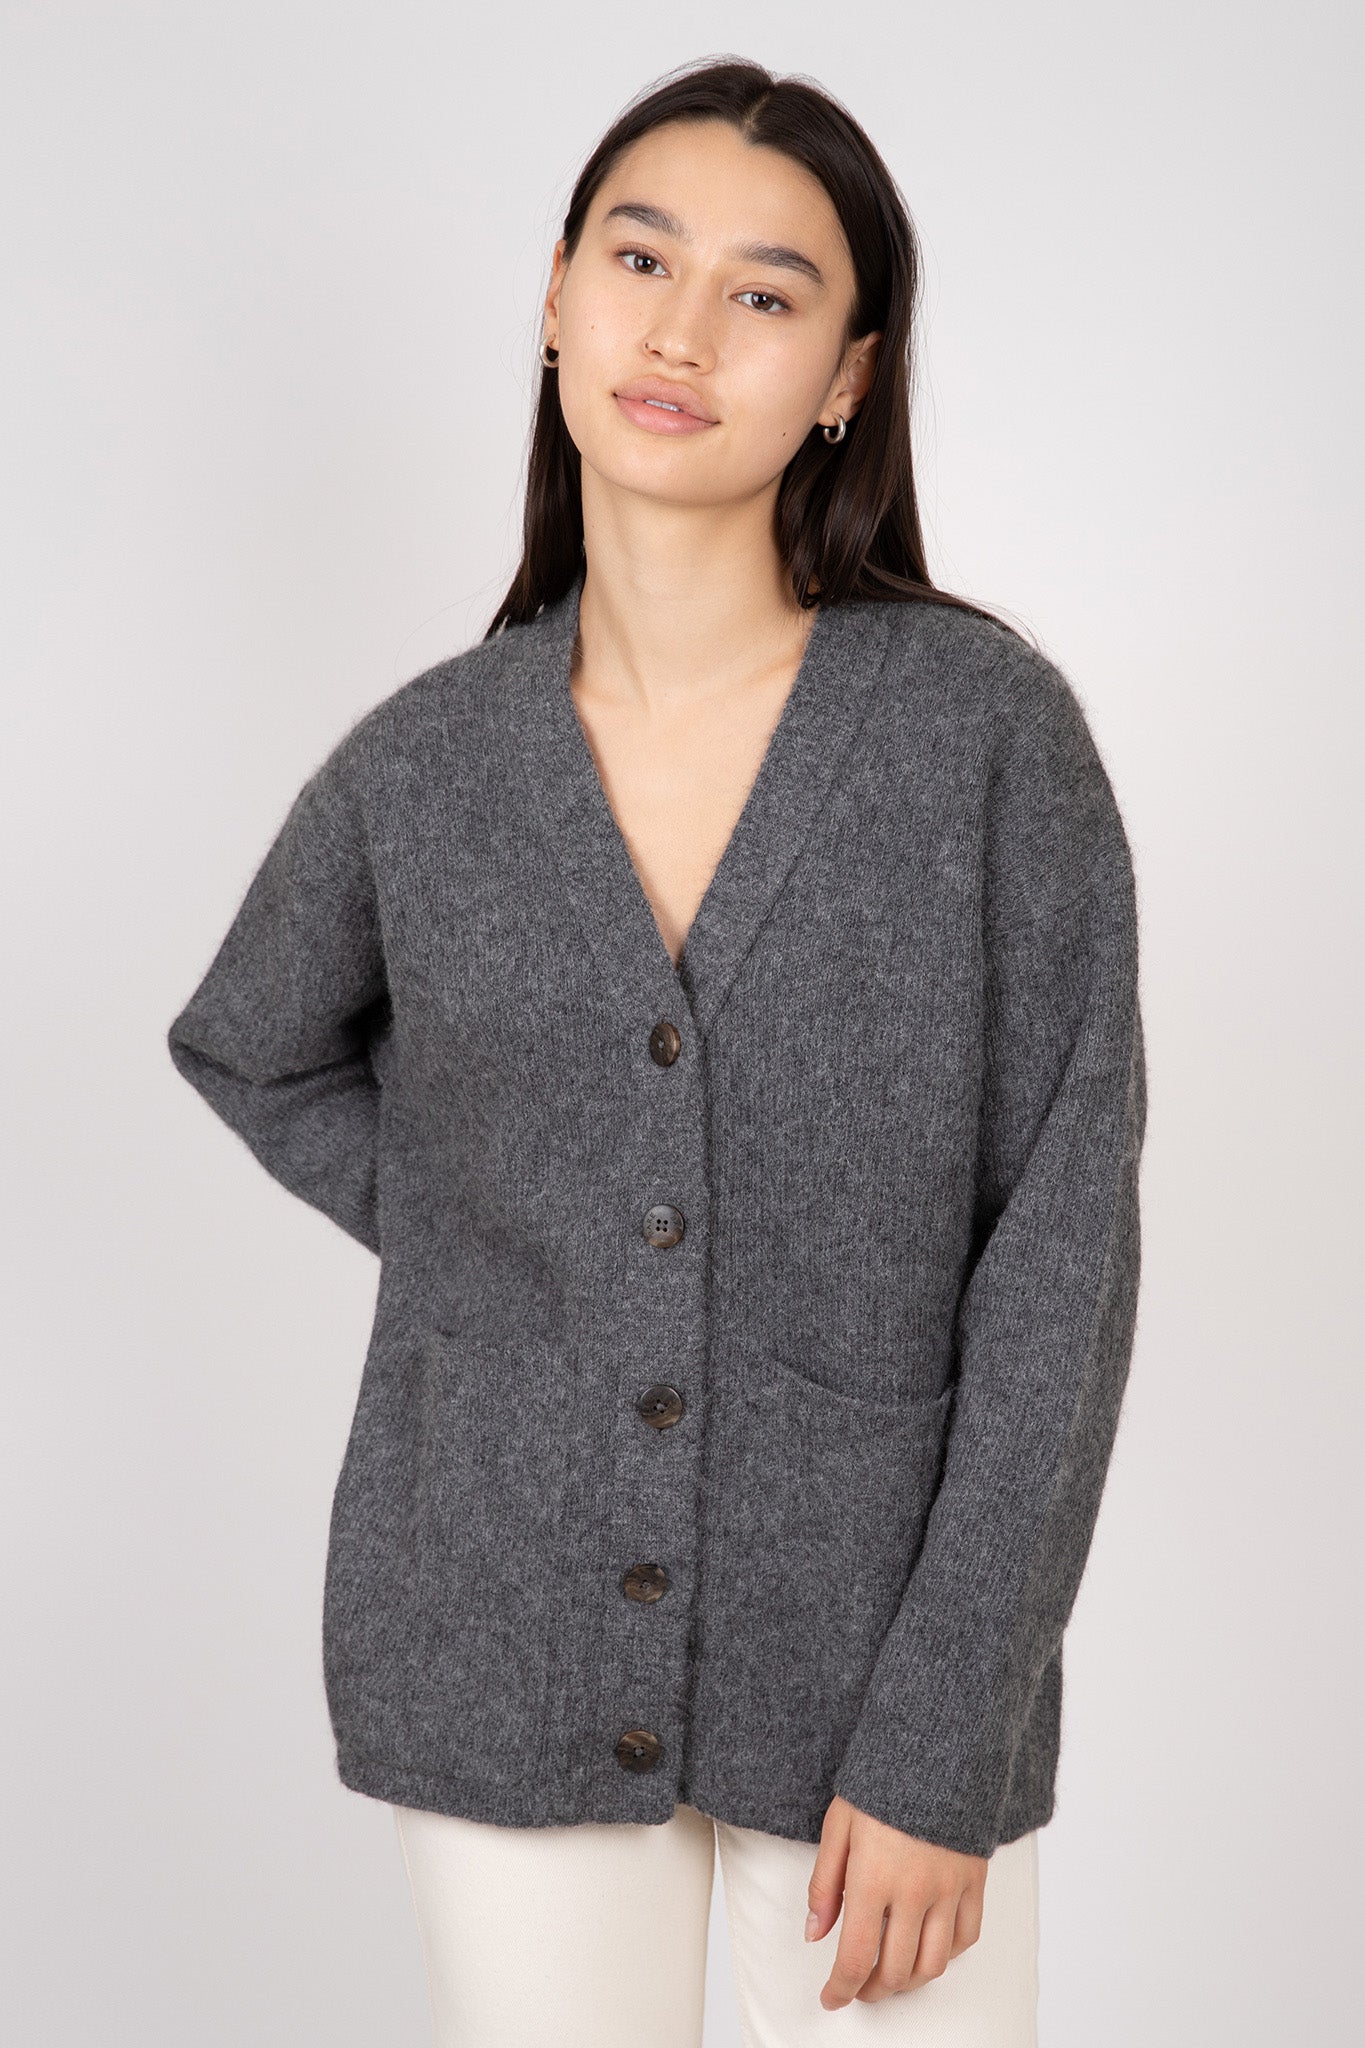 Bare Knitwear – Hill's Dry Goods